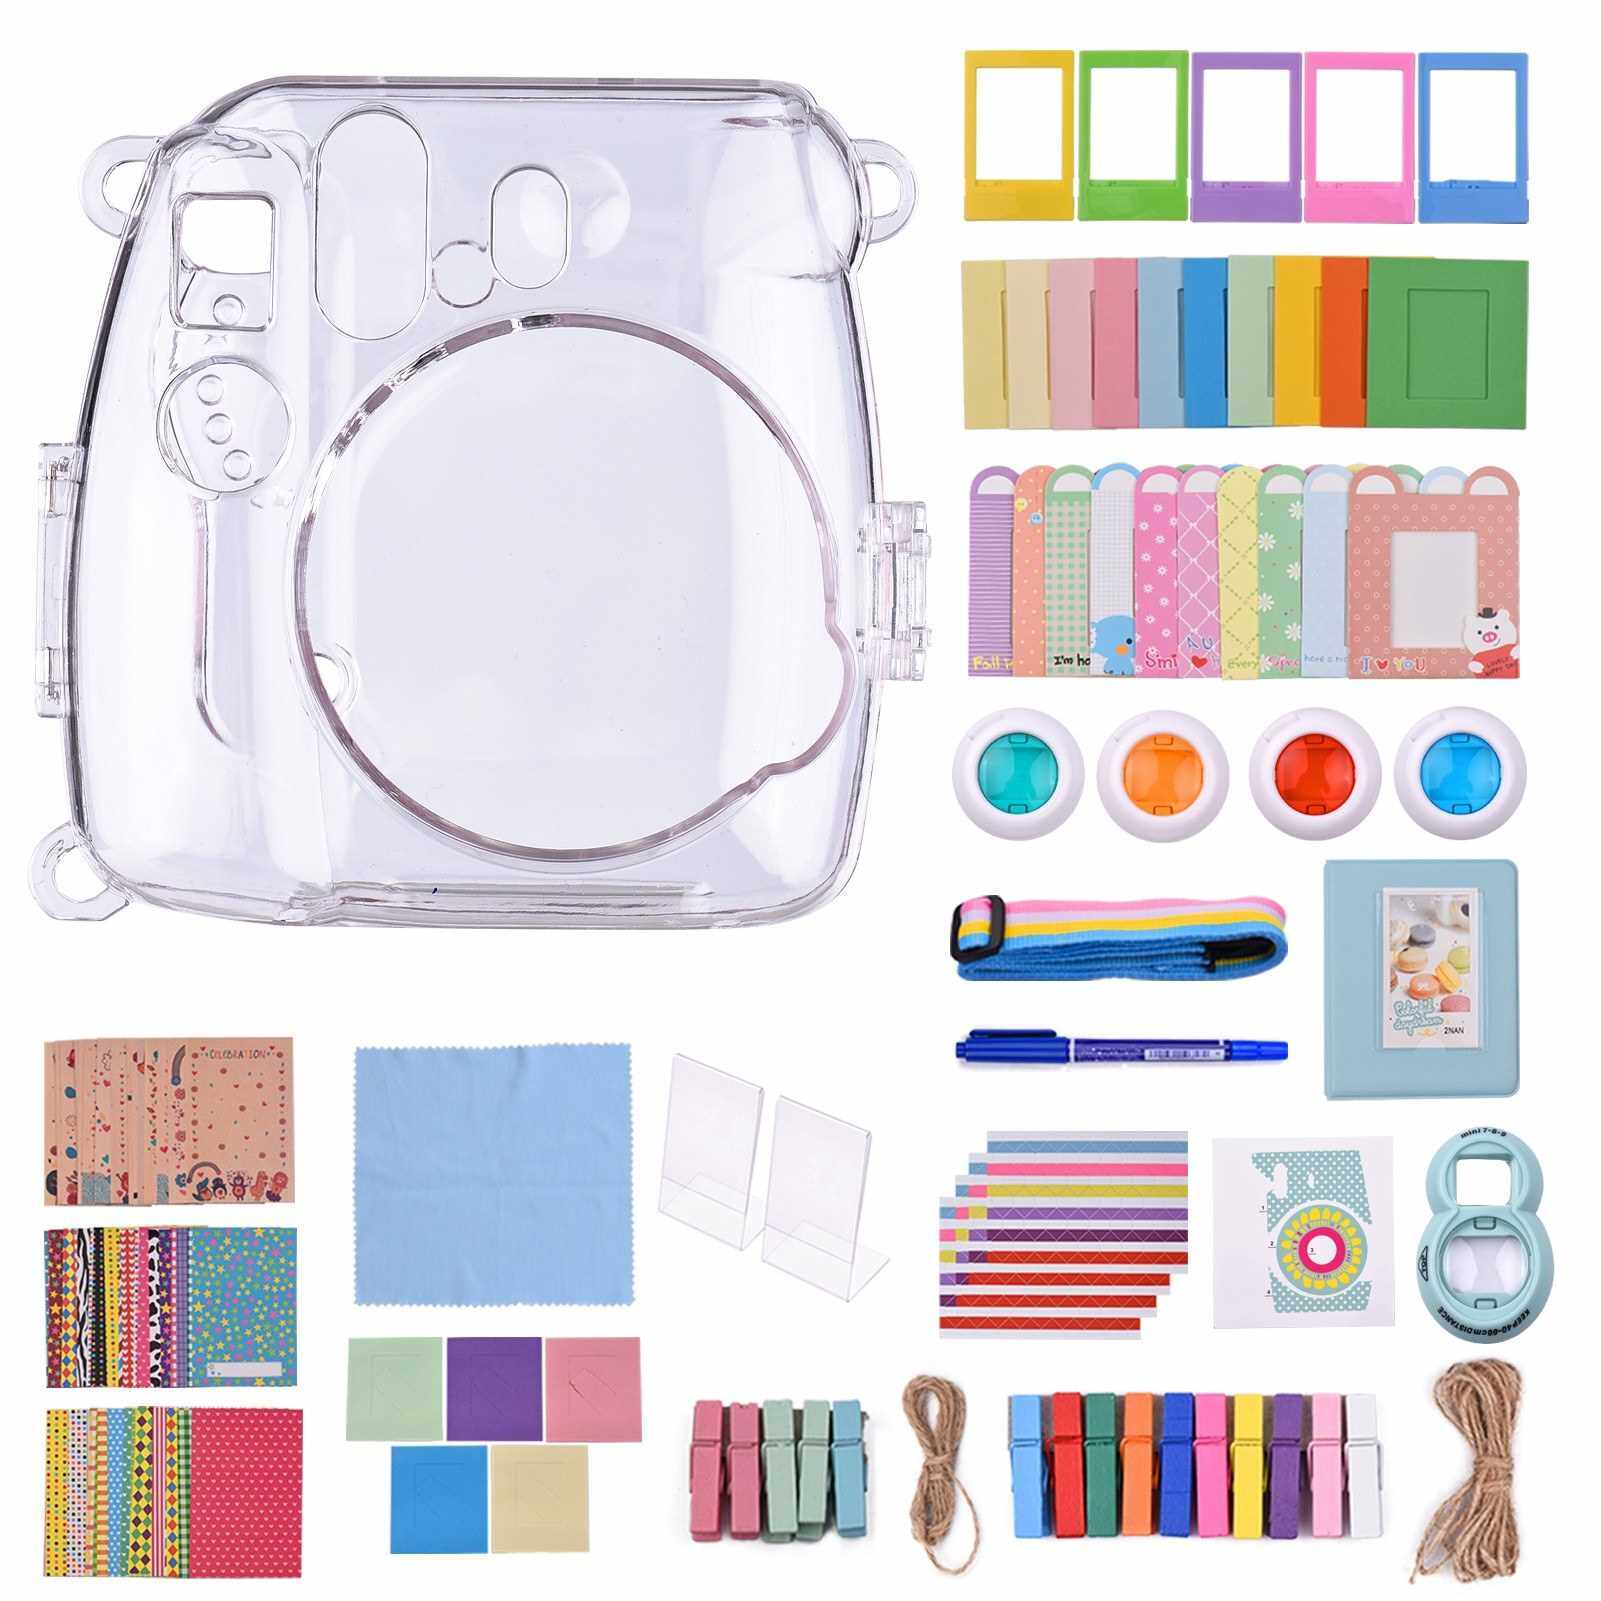 People's Choice 18-in-1 Instant Camera Accessories Kit Replacement for Fujifilm Instax Mini 8/9 Instant Film Camera with Case/ Album/ Selfie Mirror/ Stickers/ Frames/ Lens Filter/ Lanyard and More (Standard)